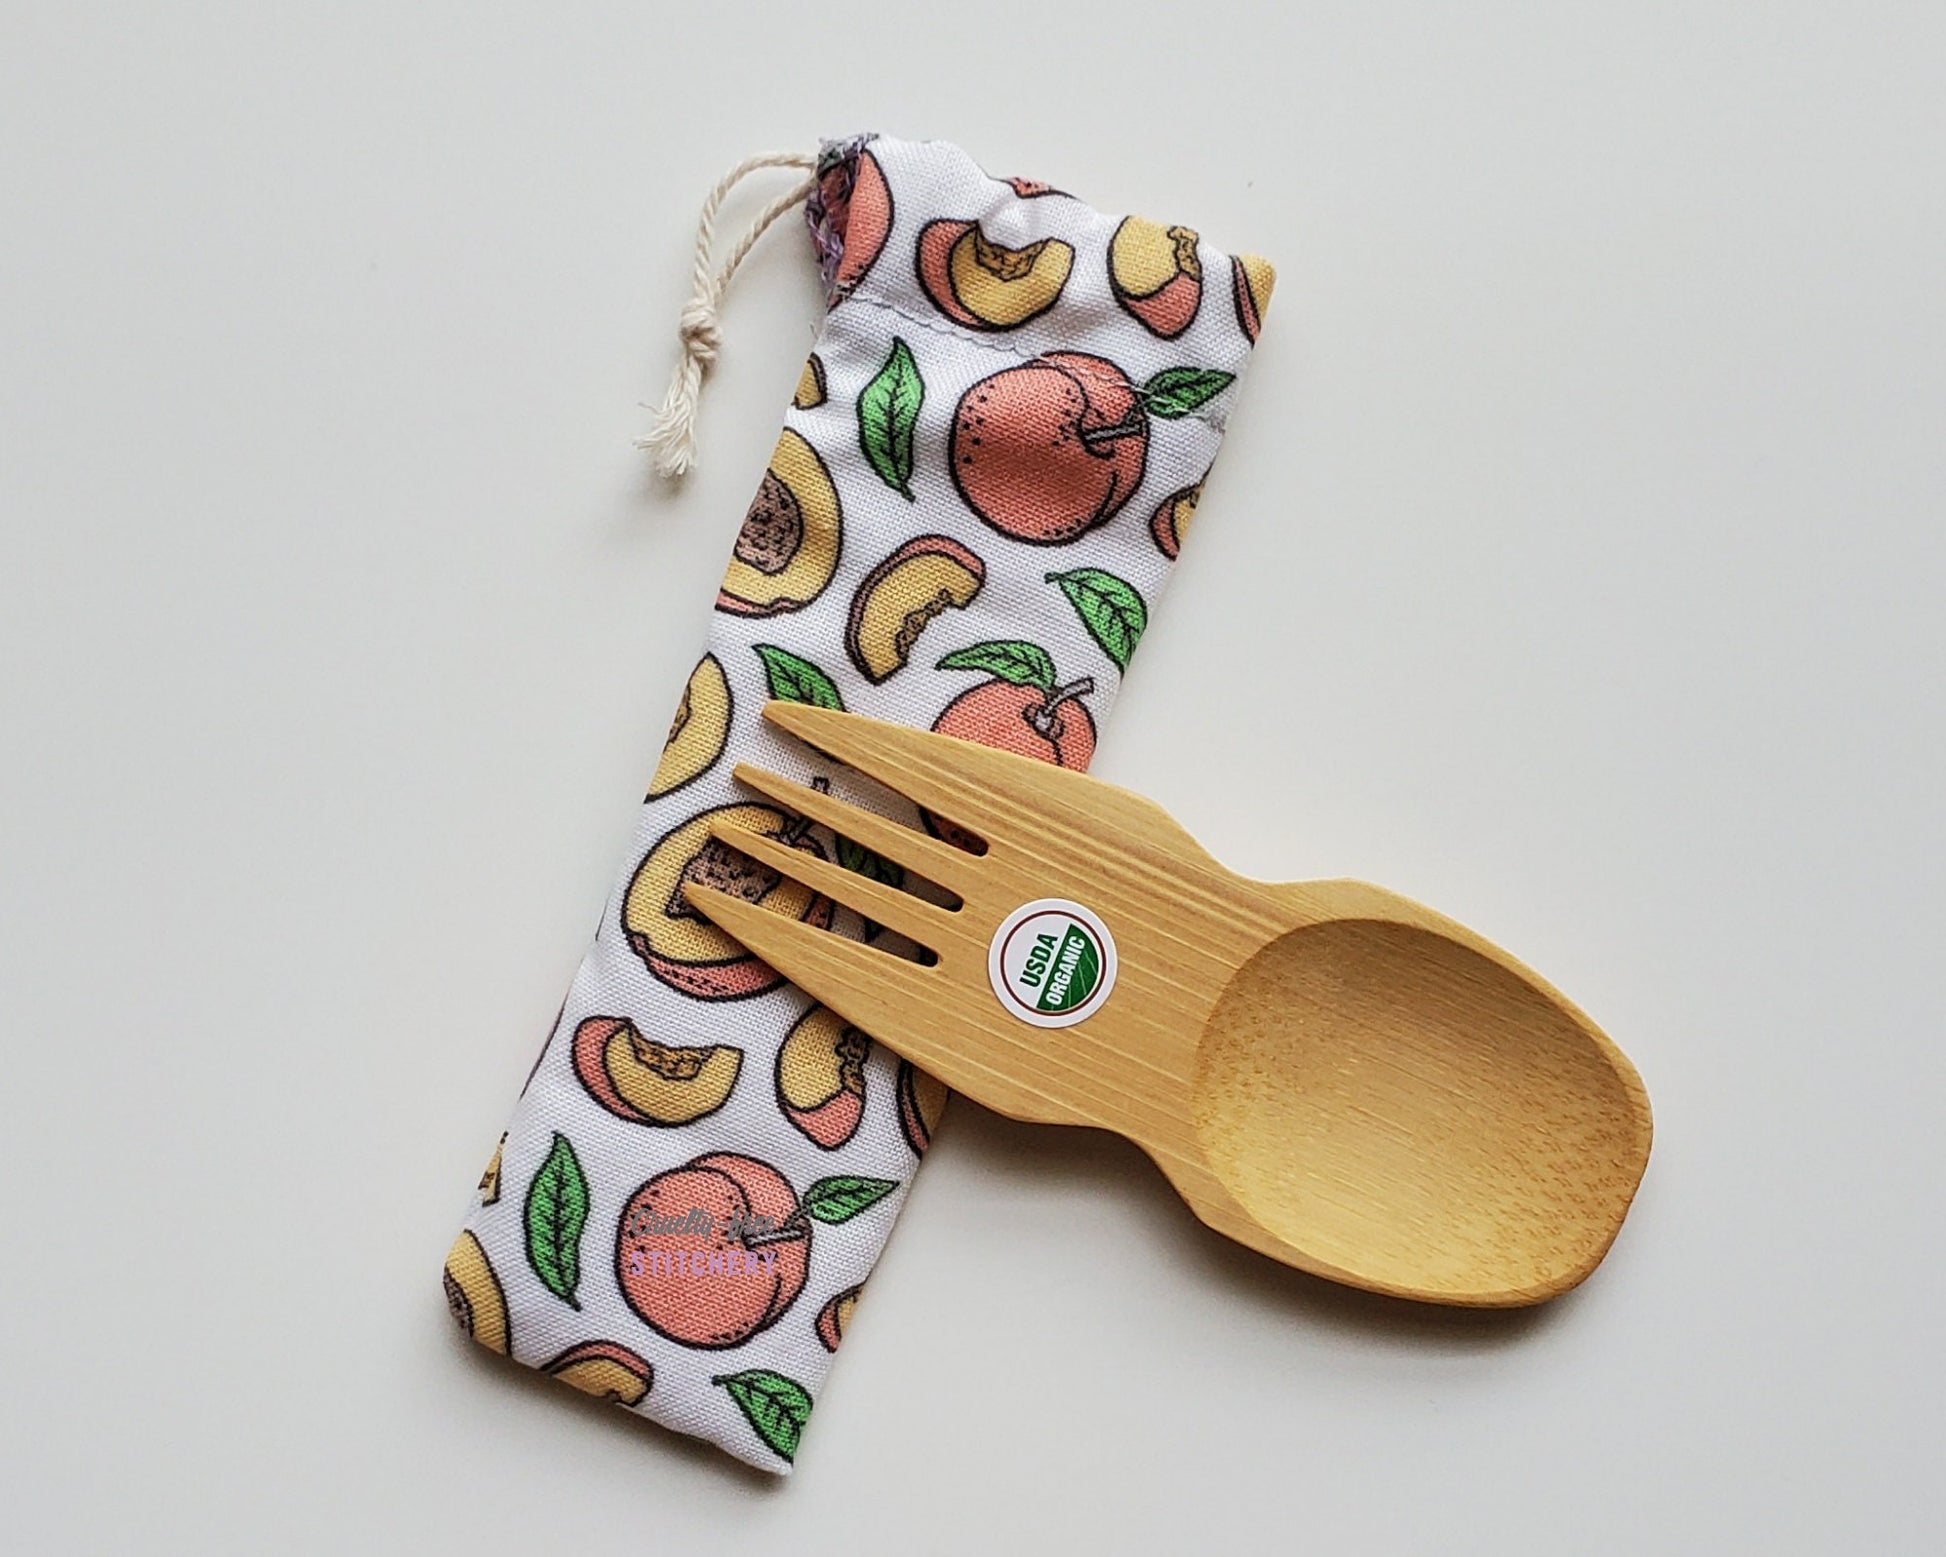 Reusable bamboo spork with pouch. The pouch is a white fabric with small peaches, some whole and some slices. The pouch is sitting diagonally with the spork partially on top pointing the other way. The spork is small, a double ended fork and spoon.